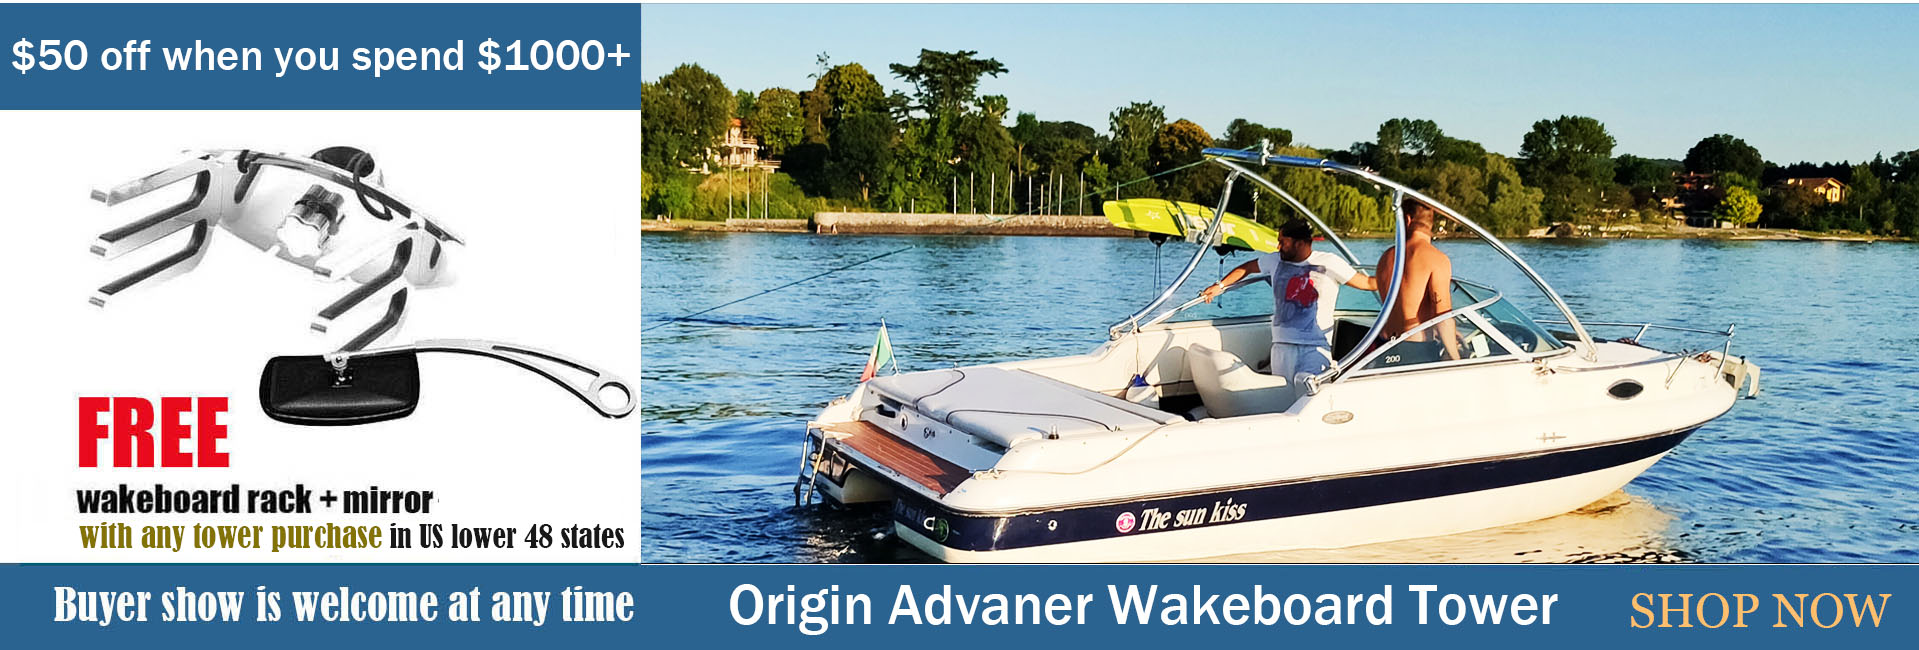 wakeboard tower